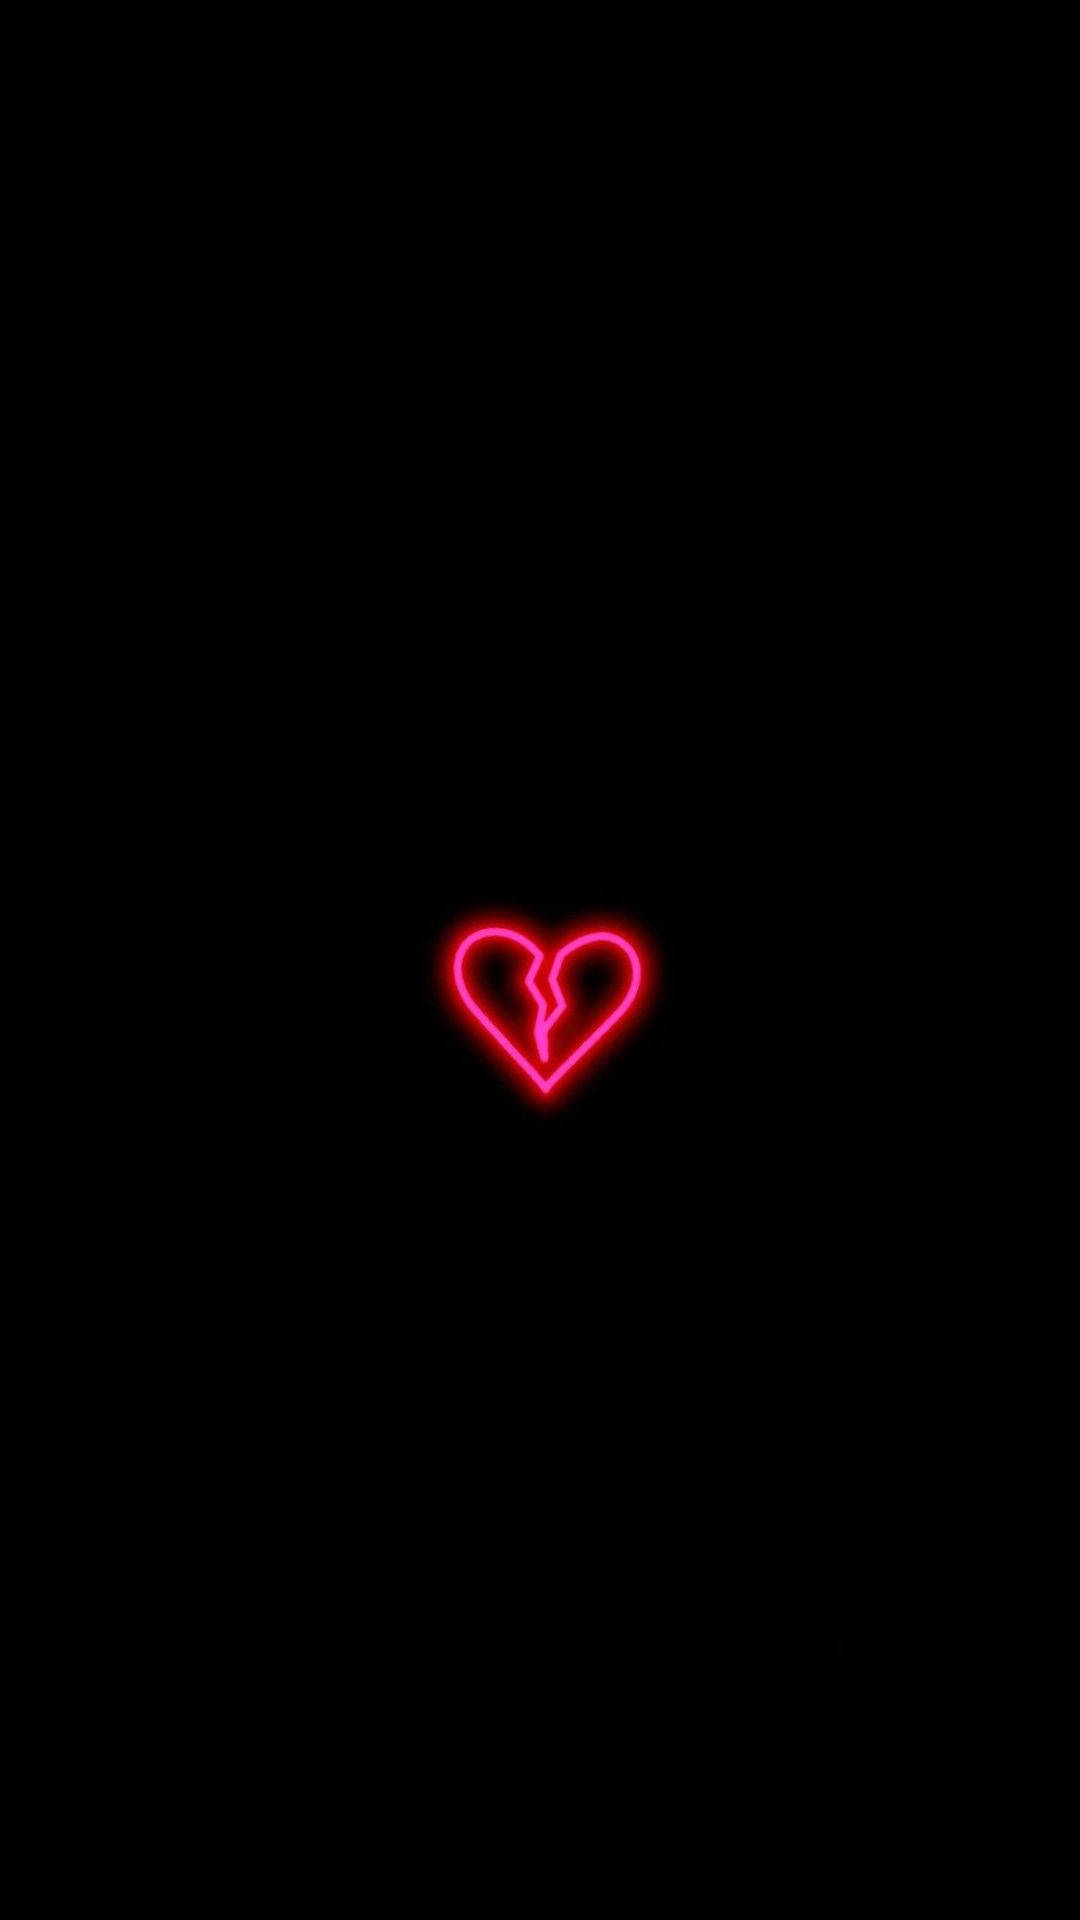 1080x1920 Download Black Heart With Red Led Wallpaper